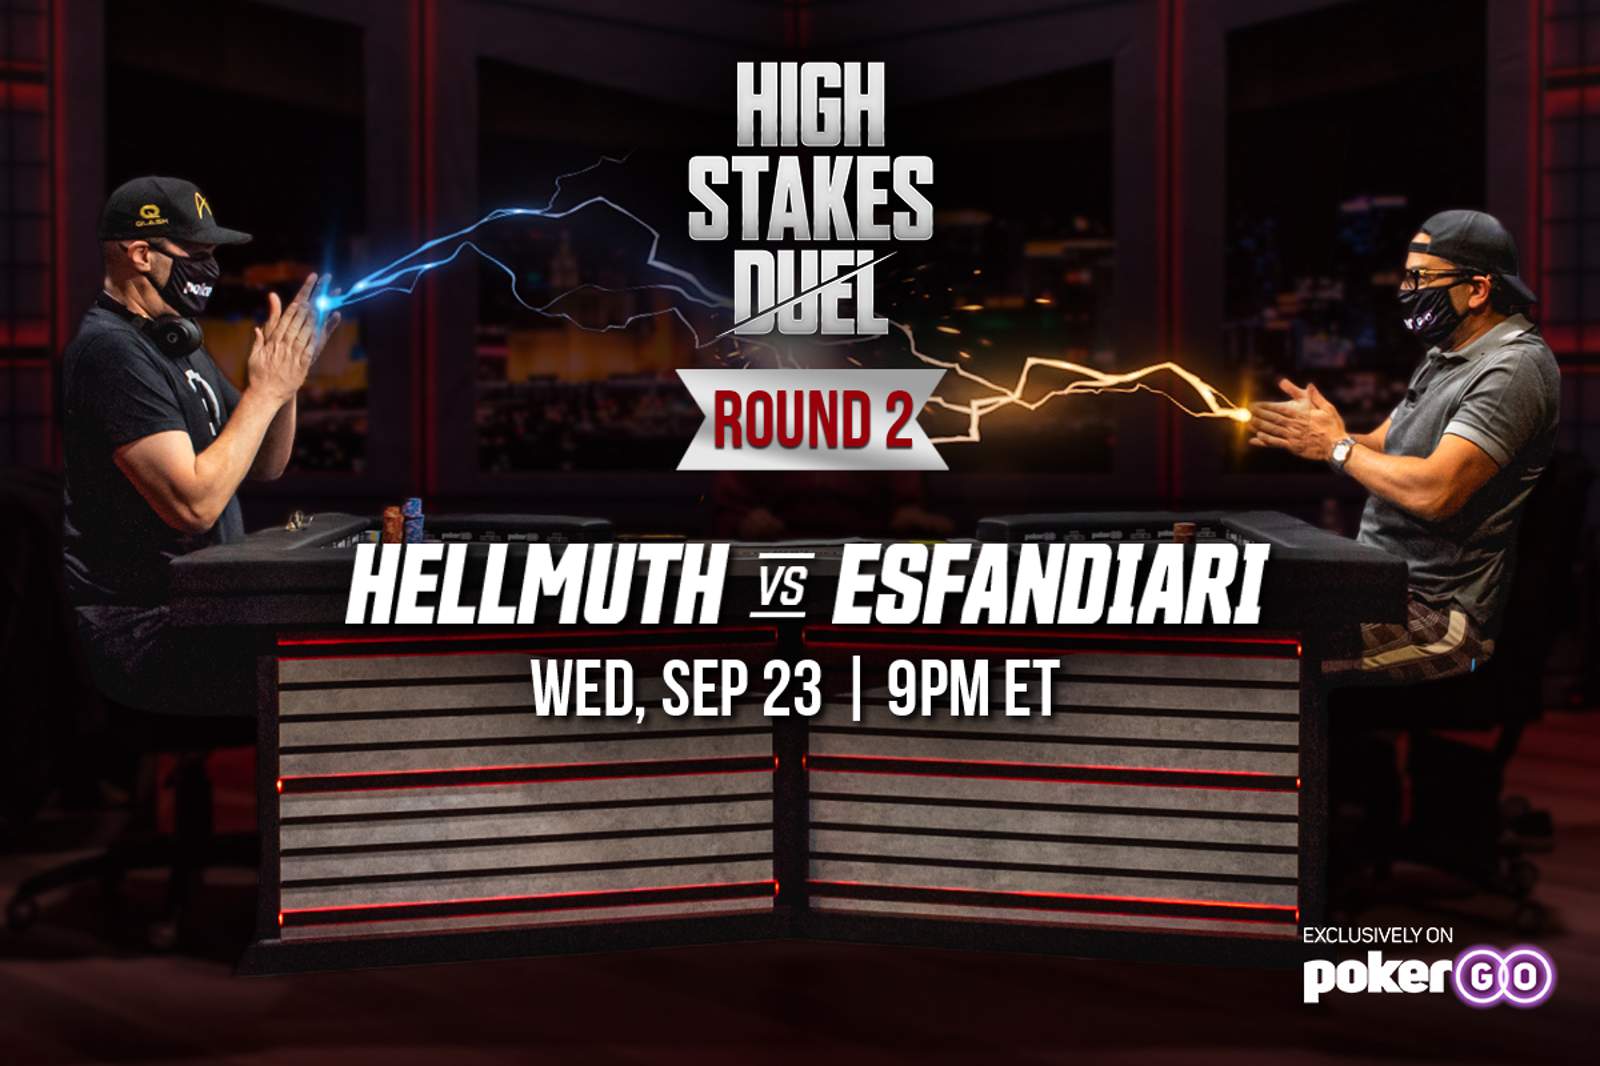 Round 2 of High Stakes Duel Announced for Wednesday, September 23